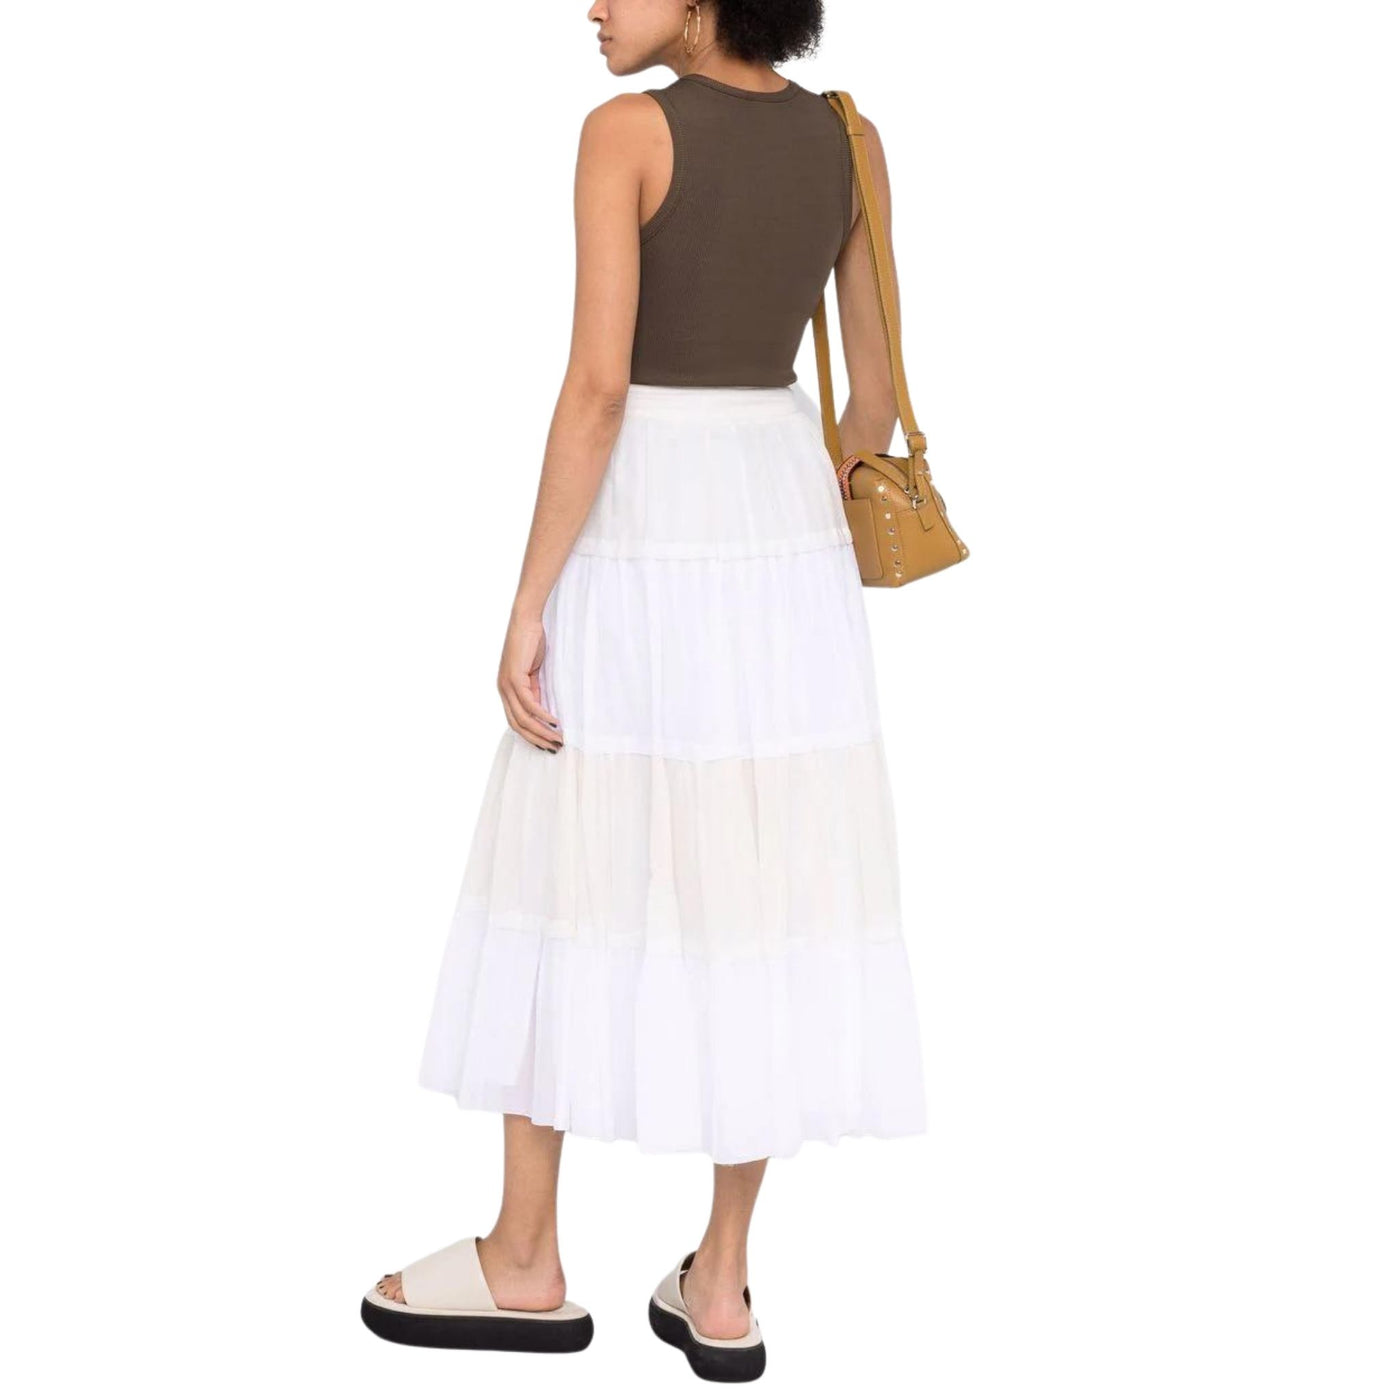 Women's skirt in high-waisted cotton with flounces